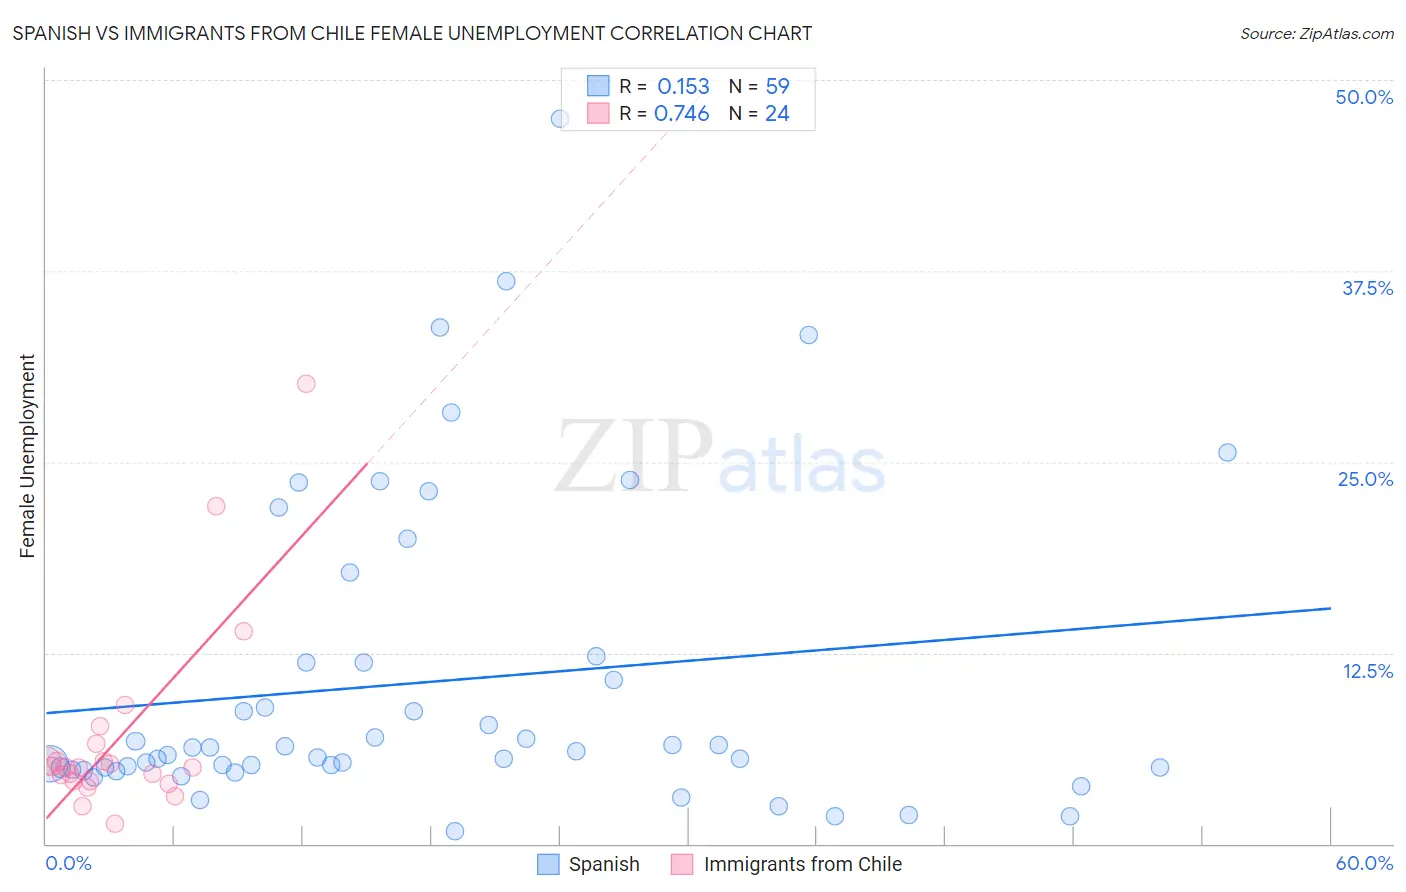 Spanish vs Immigrants from Chile Female Unemployment